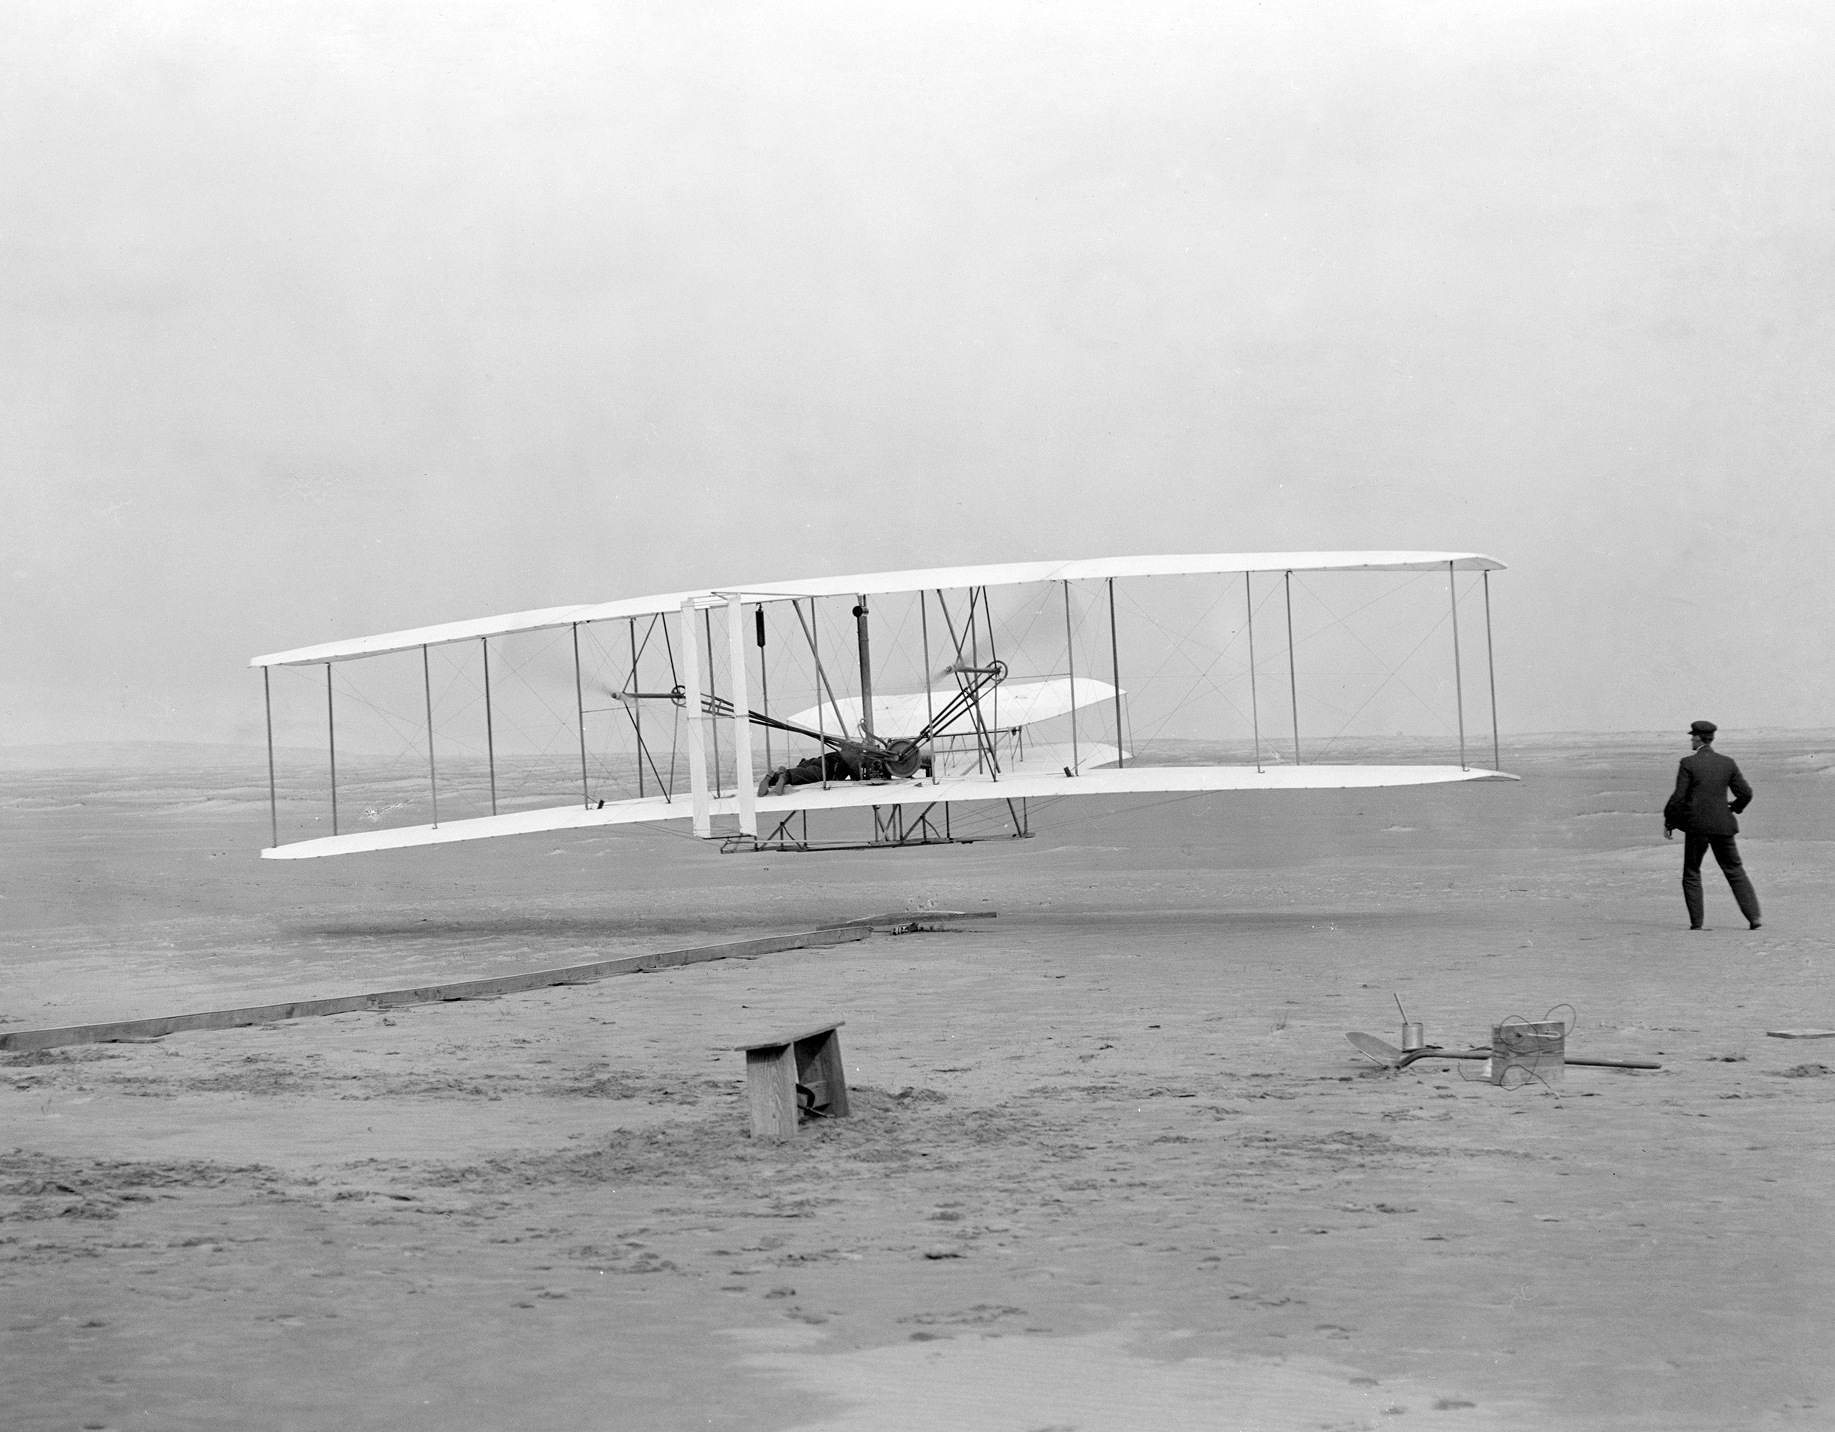 [1835 x 1432 photo (72 dpi) of Orville Wright's famous first airplane flight, 1903]